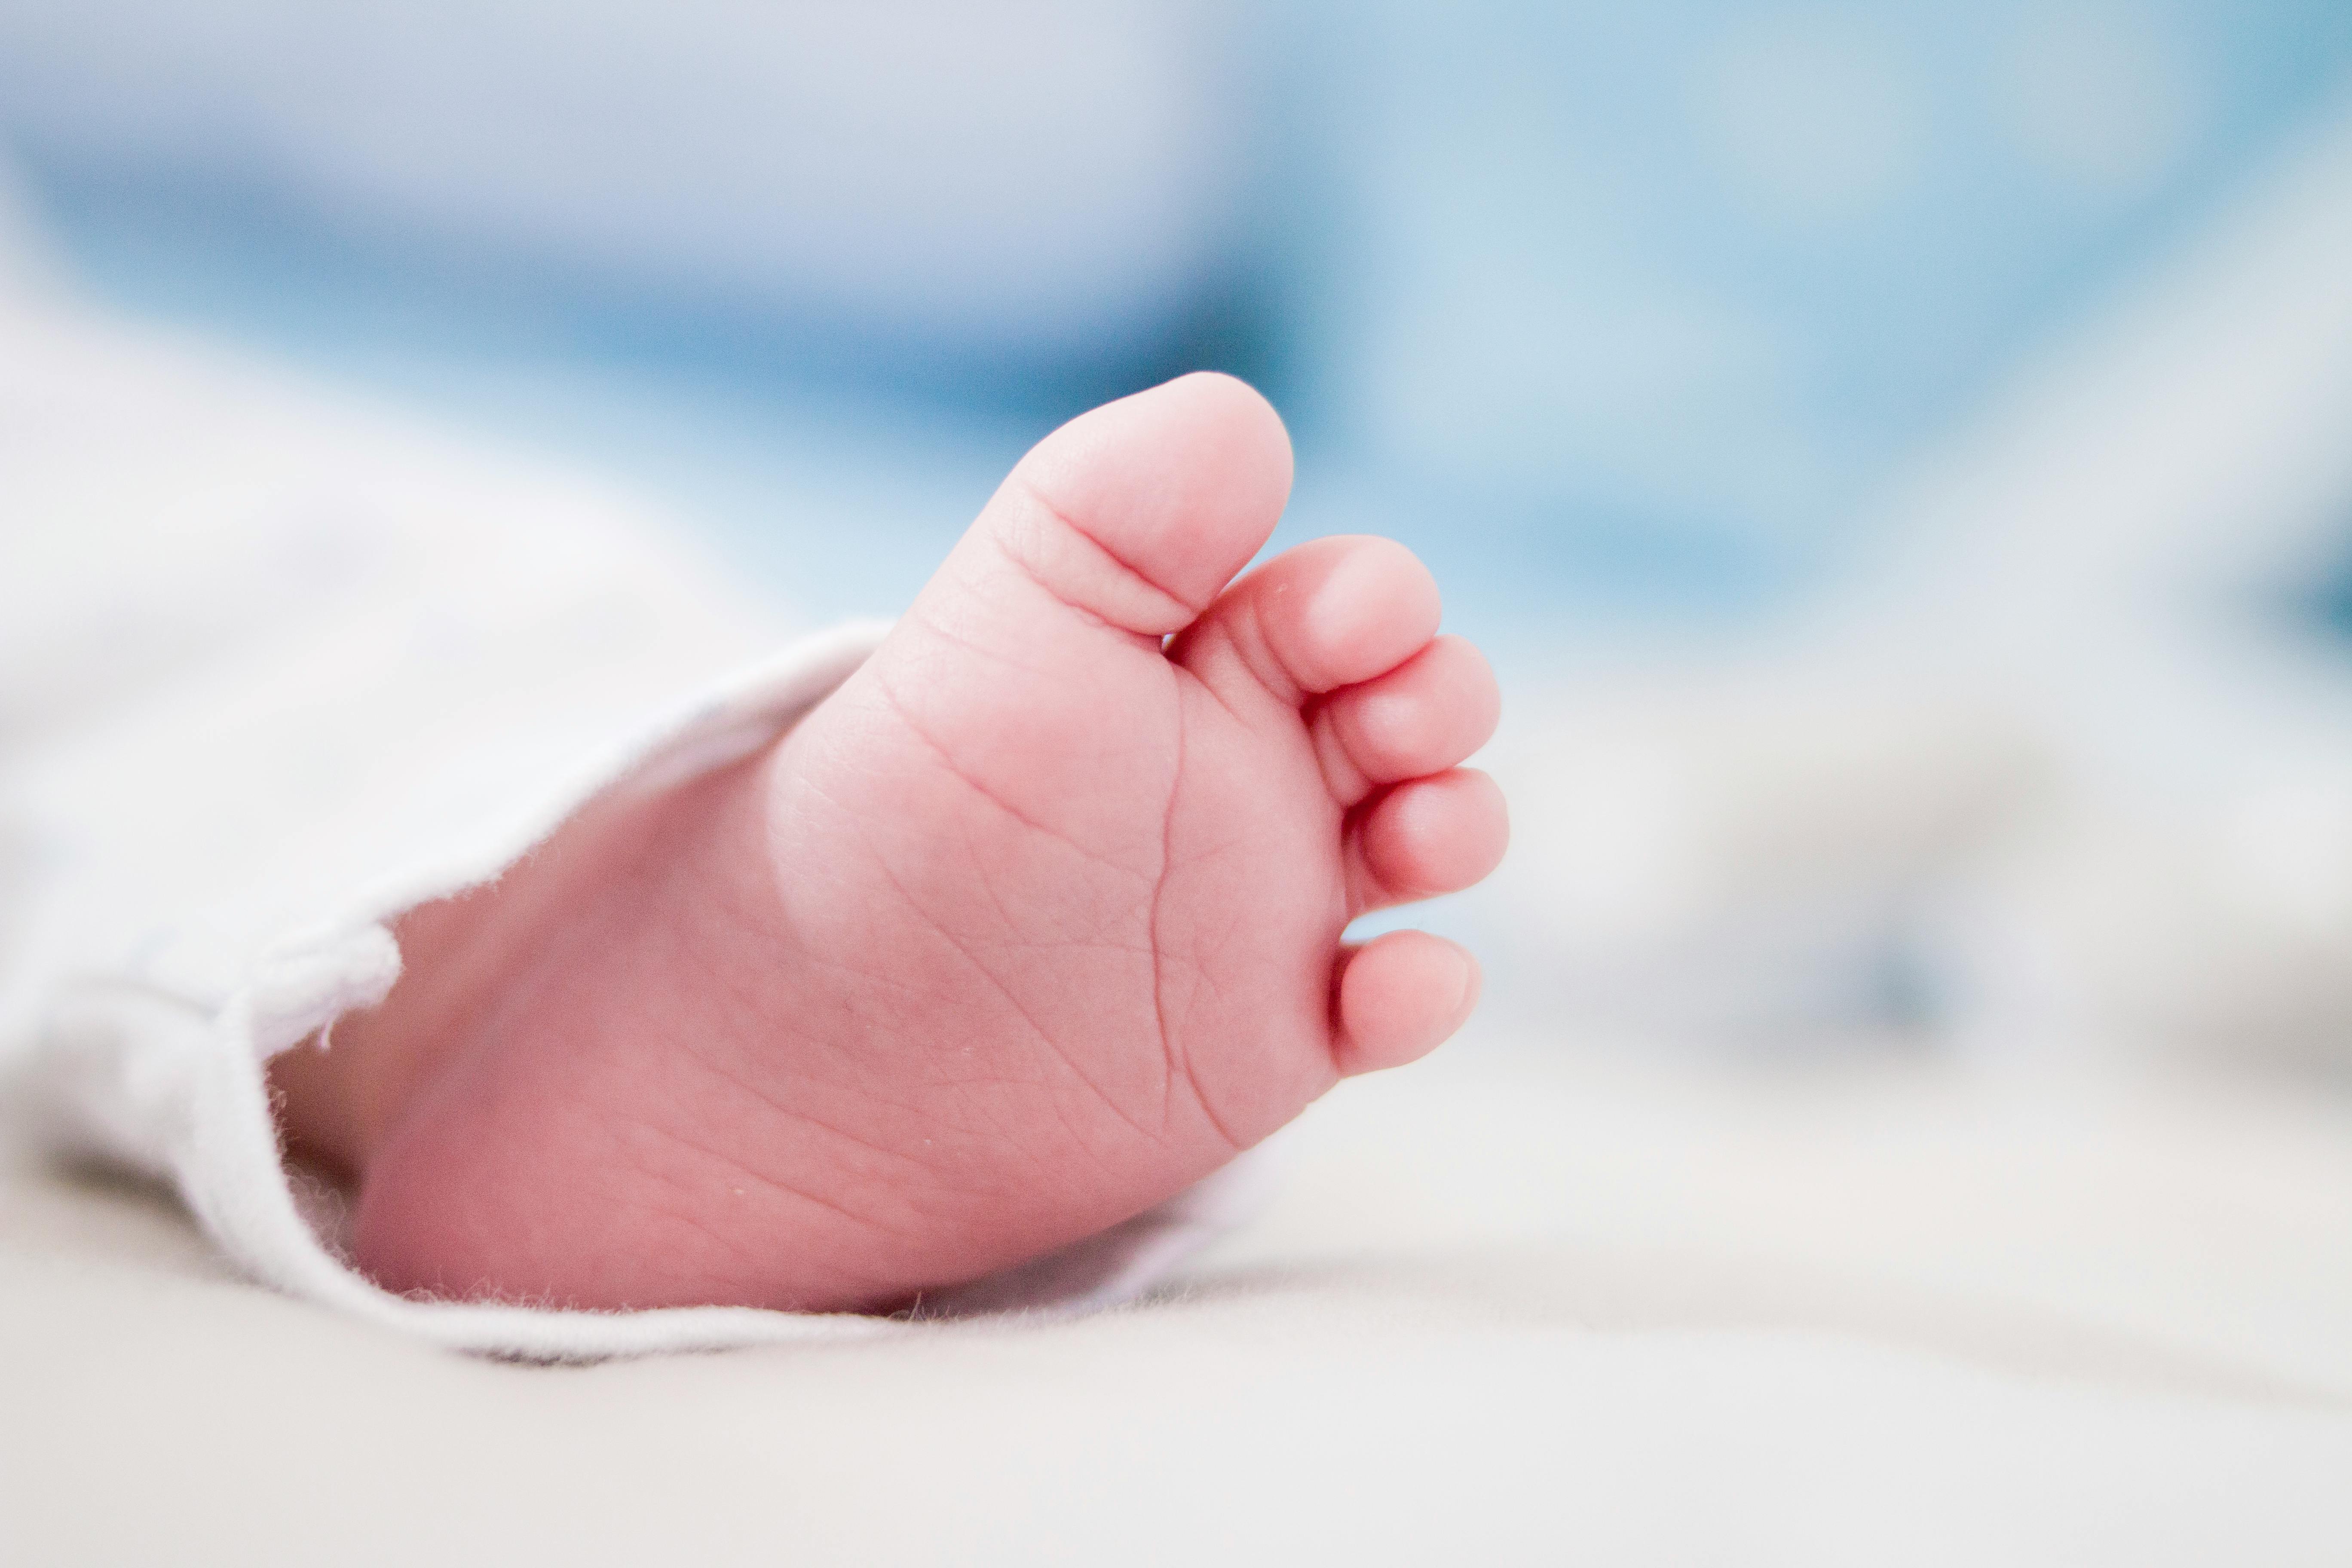 Baby Foot Photos, Download The BEST Free Baby Foot Stock Photos